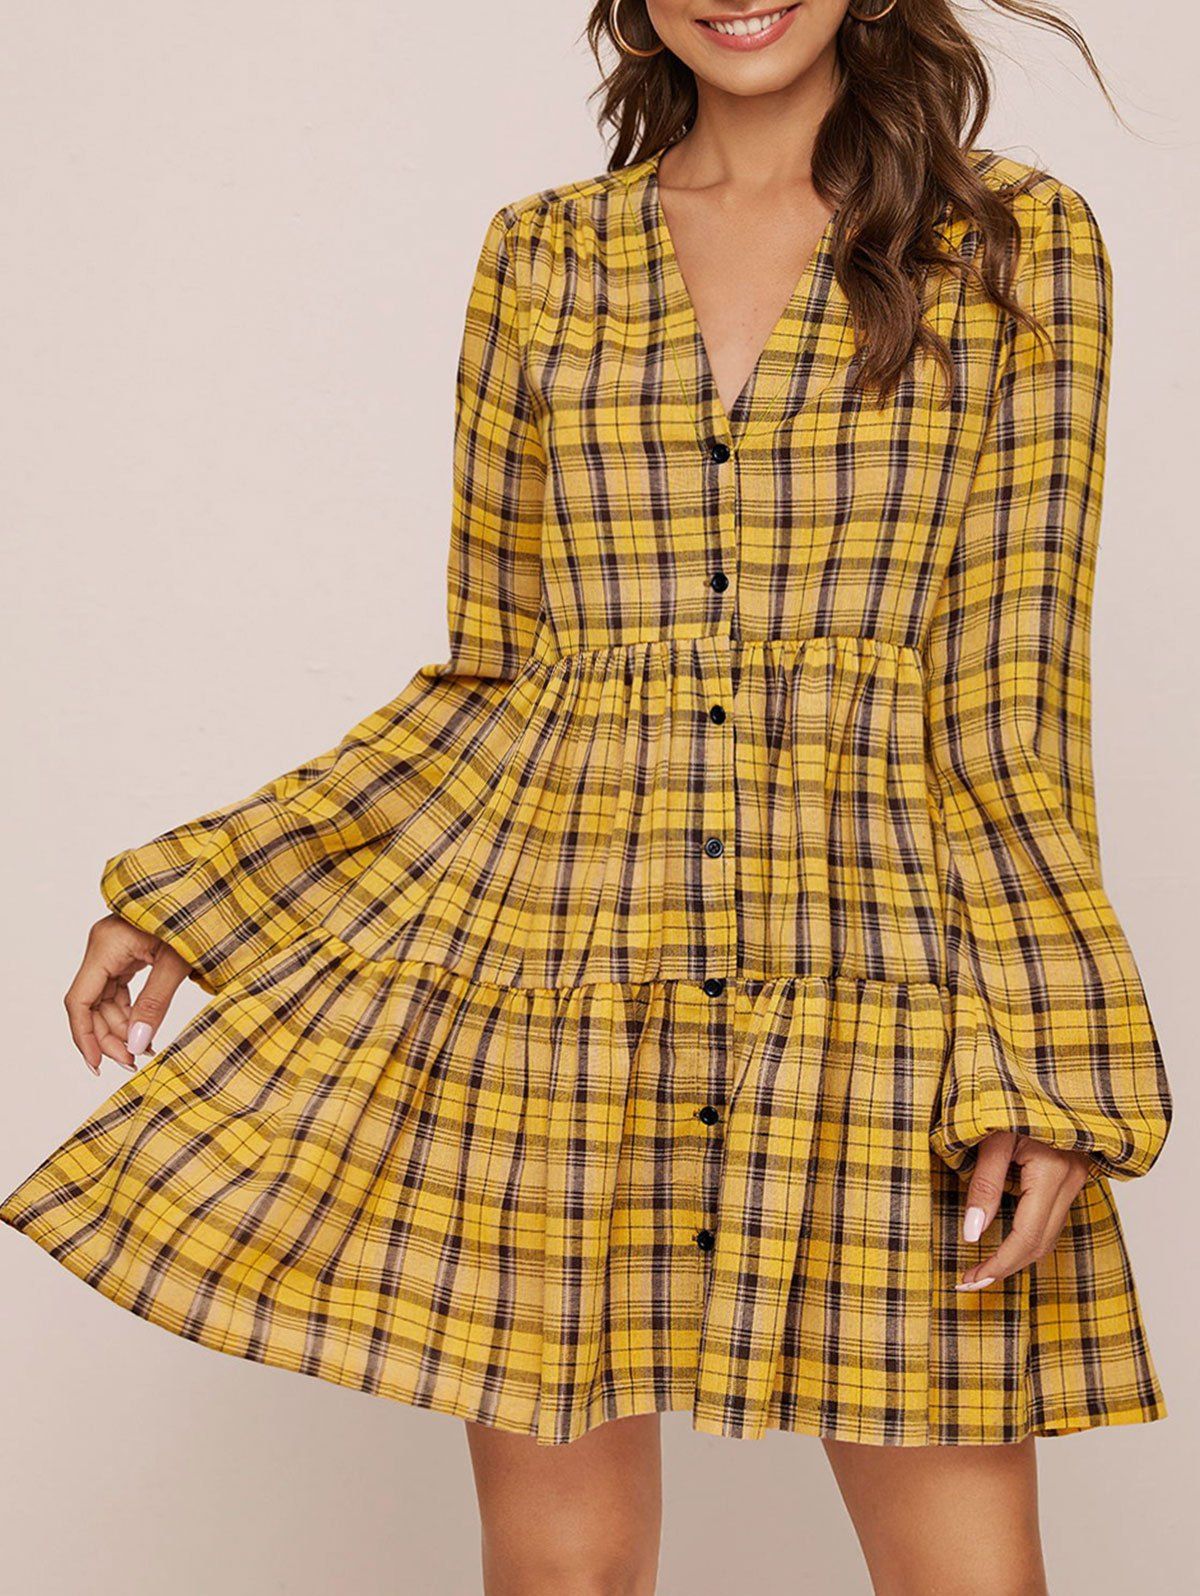 Plaid Button Up Tiered Dress - YELLOW M